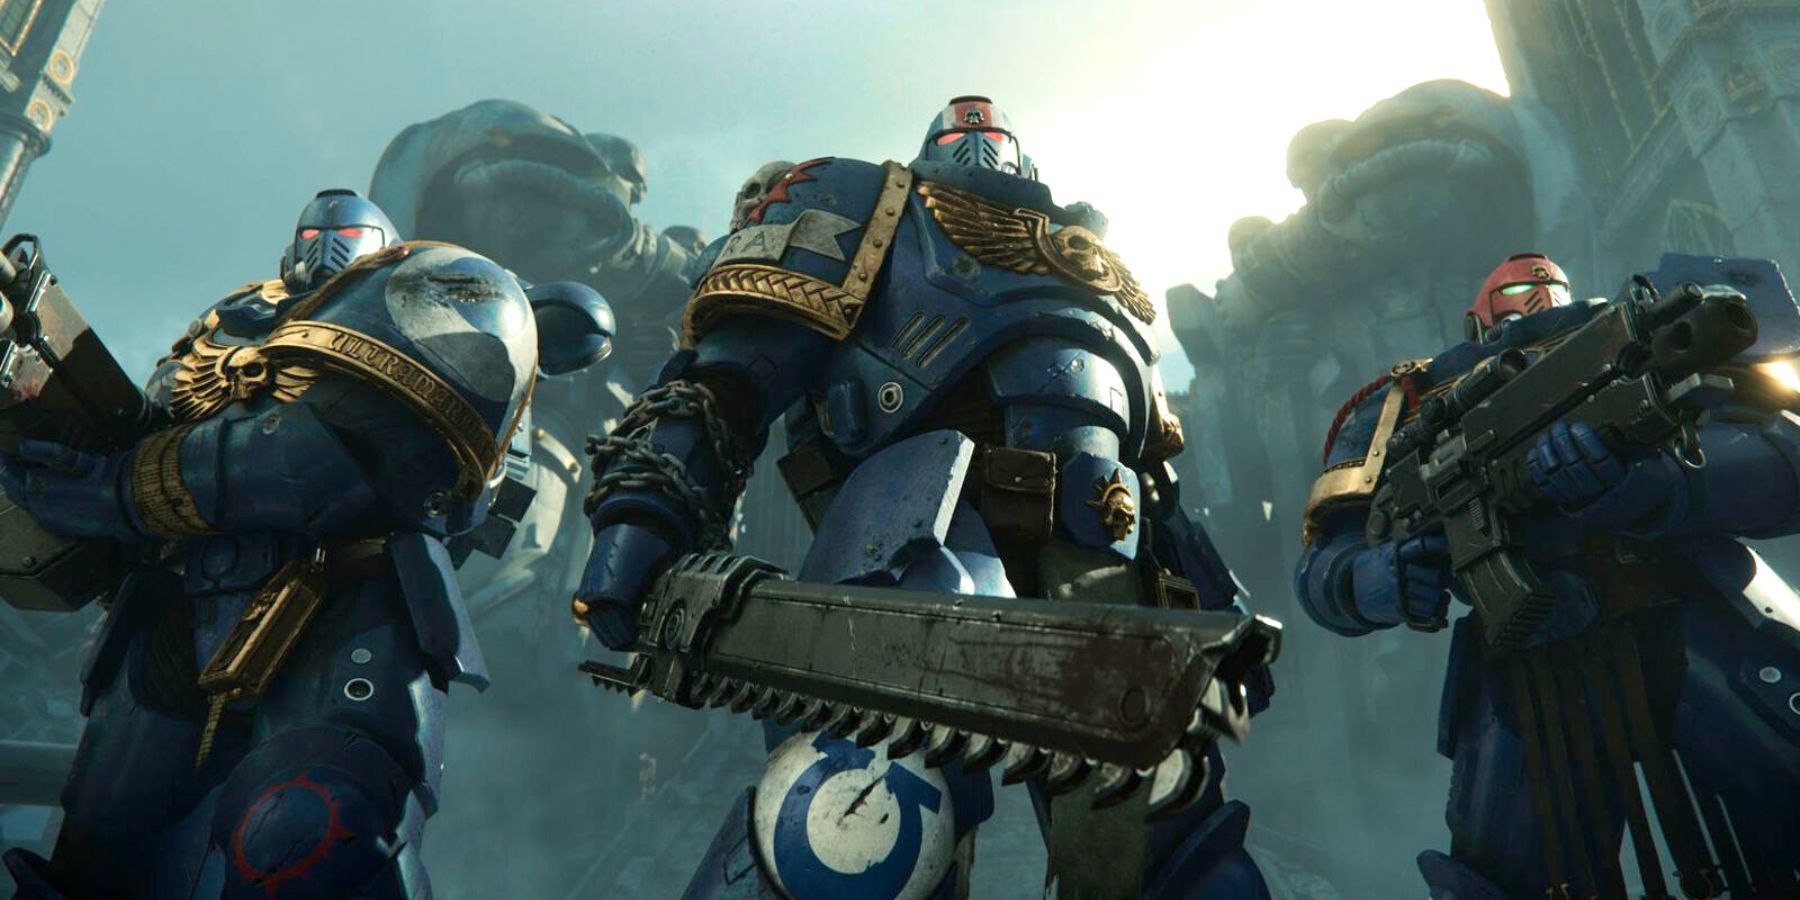 Major Genres That Warhammer 40k Games Have Yet to Tackle